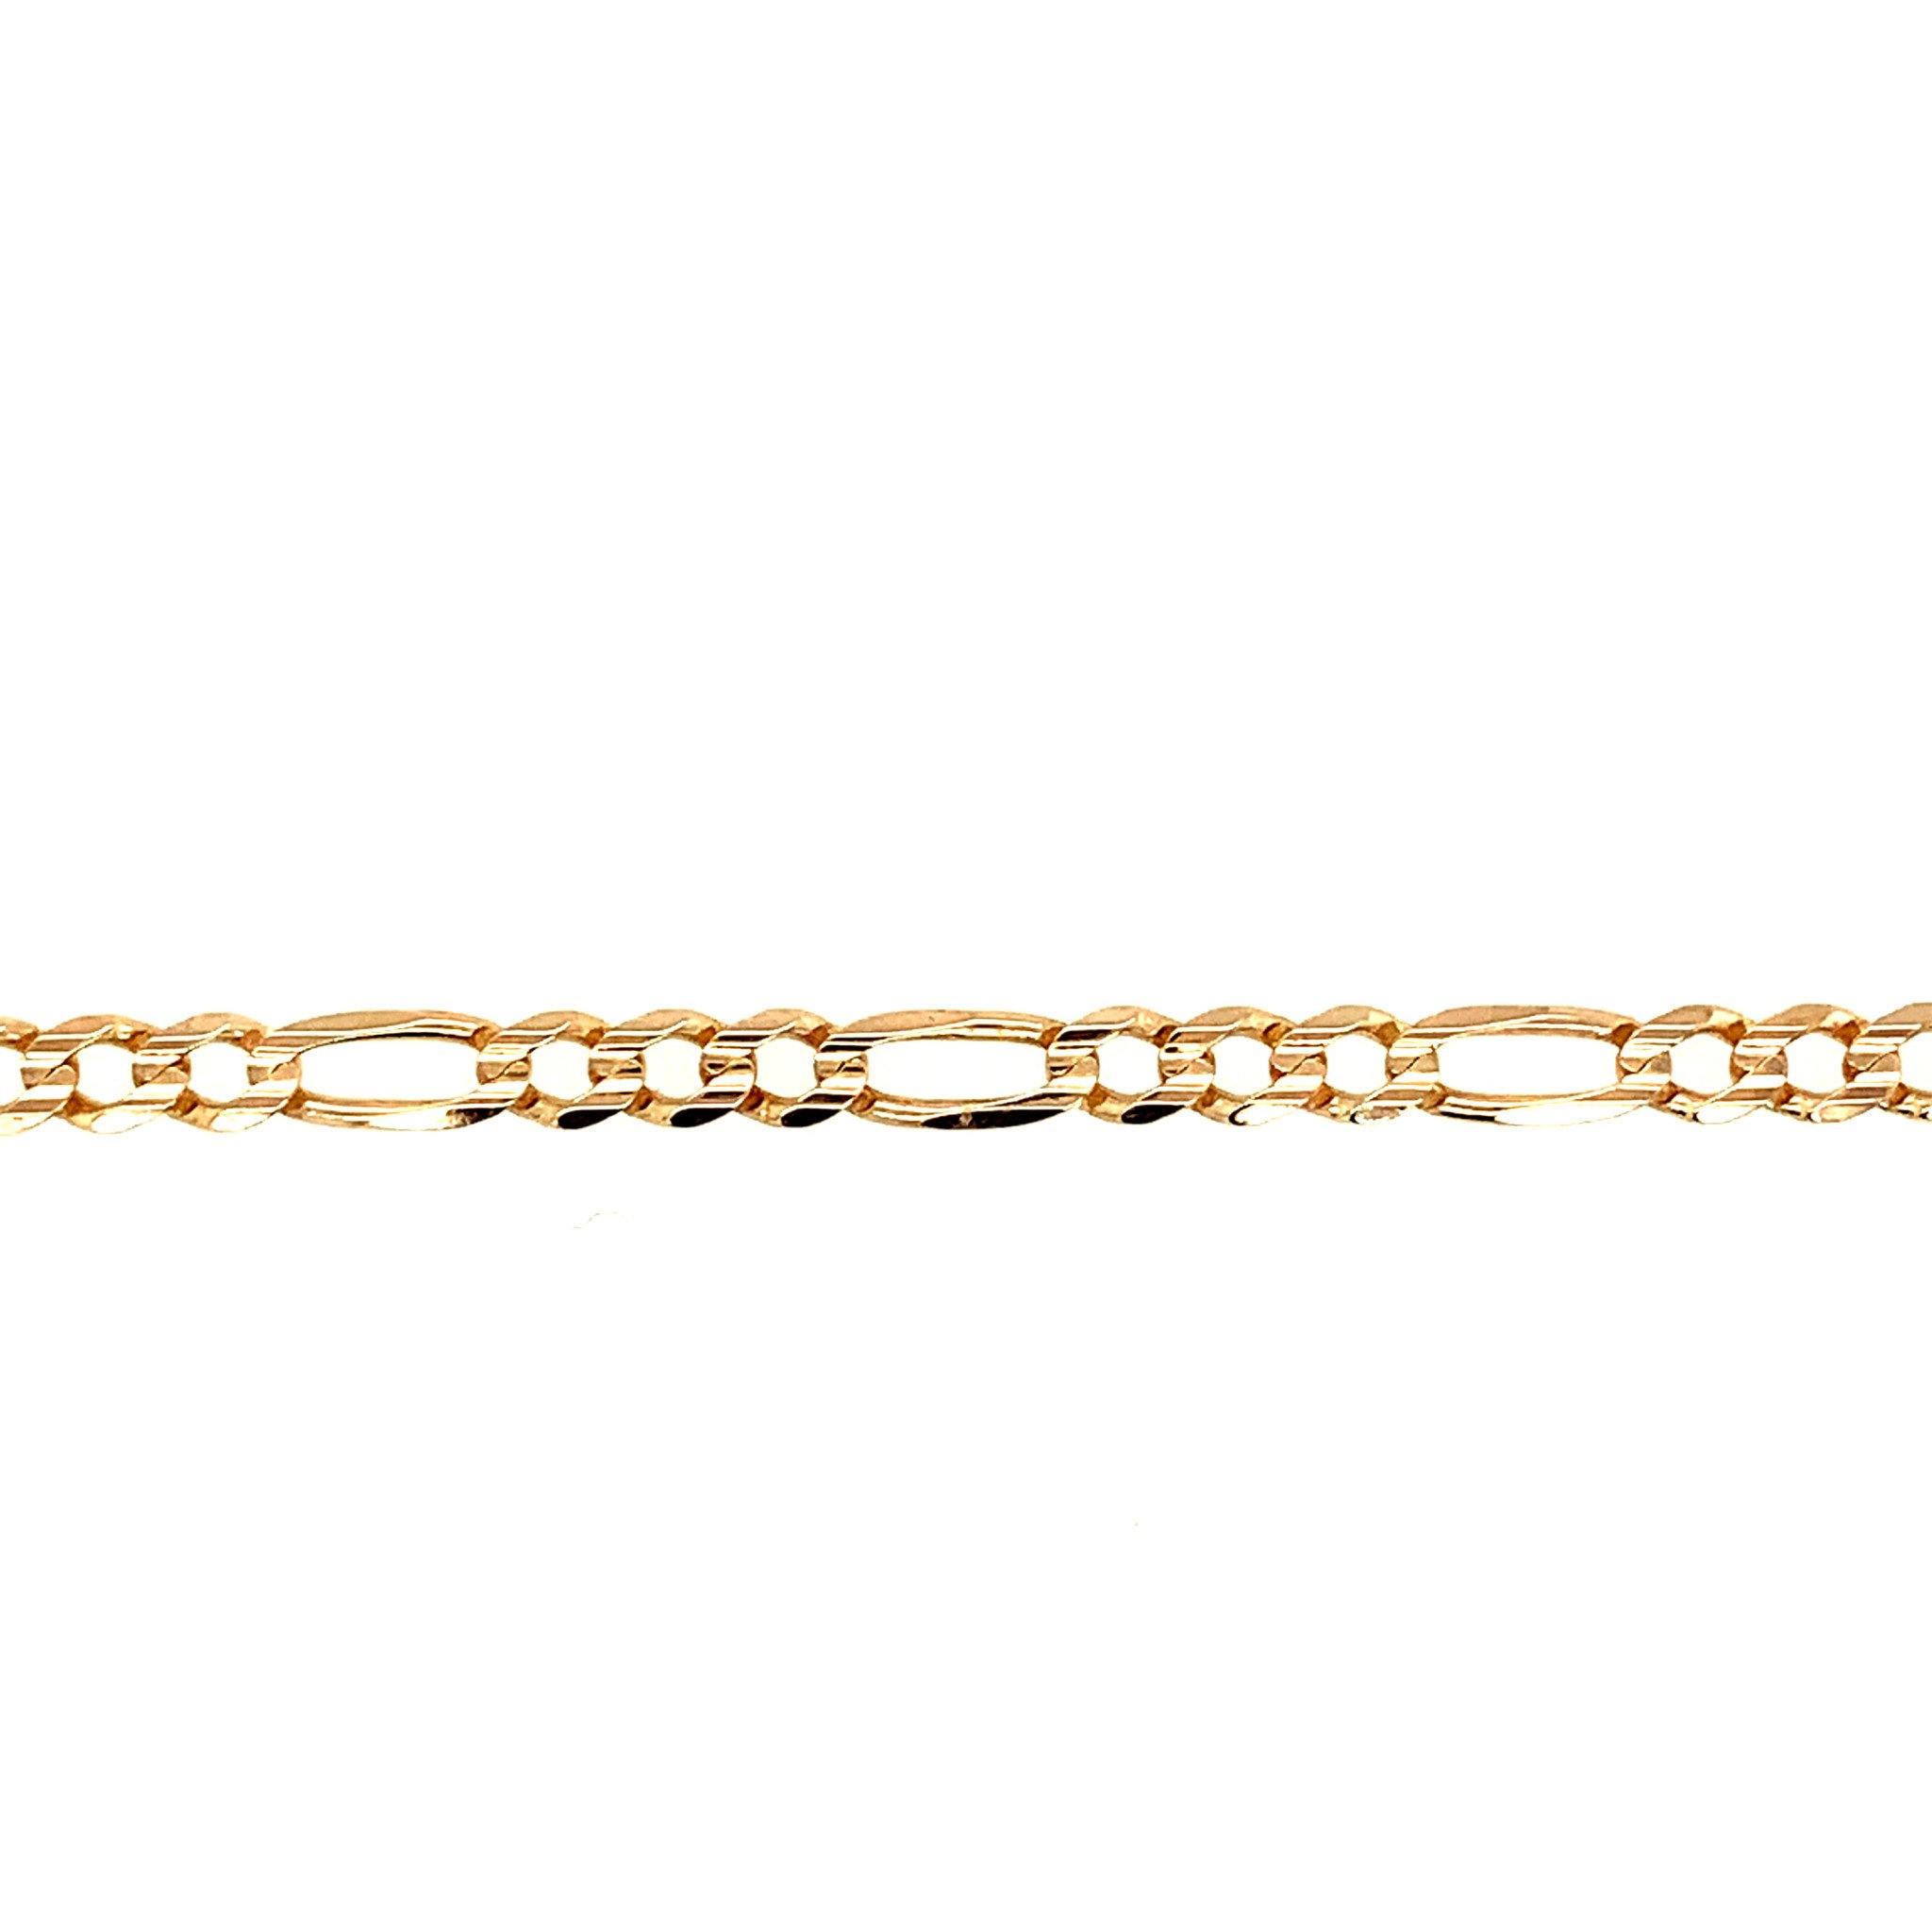 20135 14K YELLOW GOLD 3.7MM 11" FIGARO LINK ANKLET